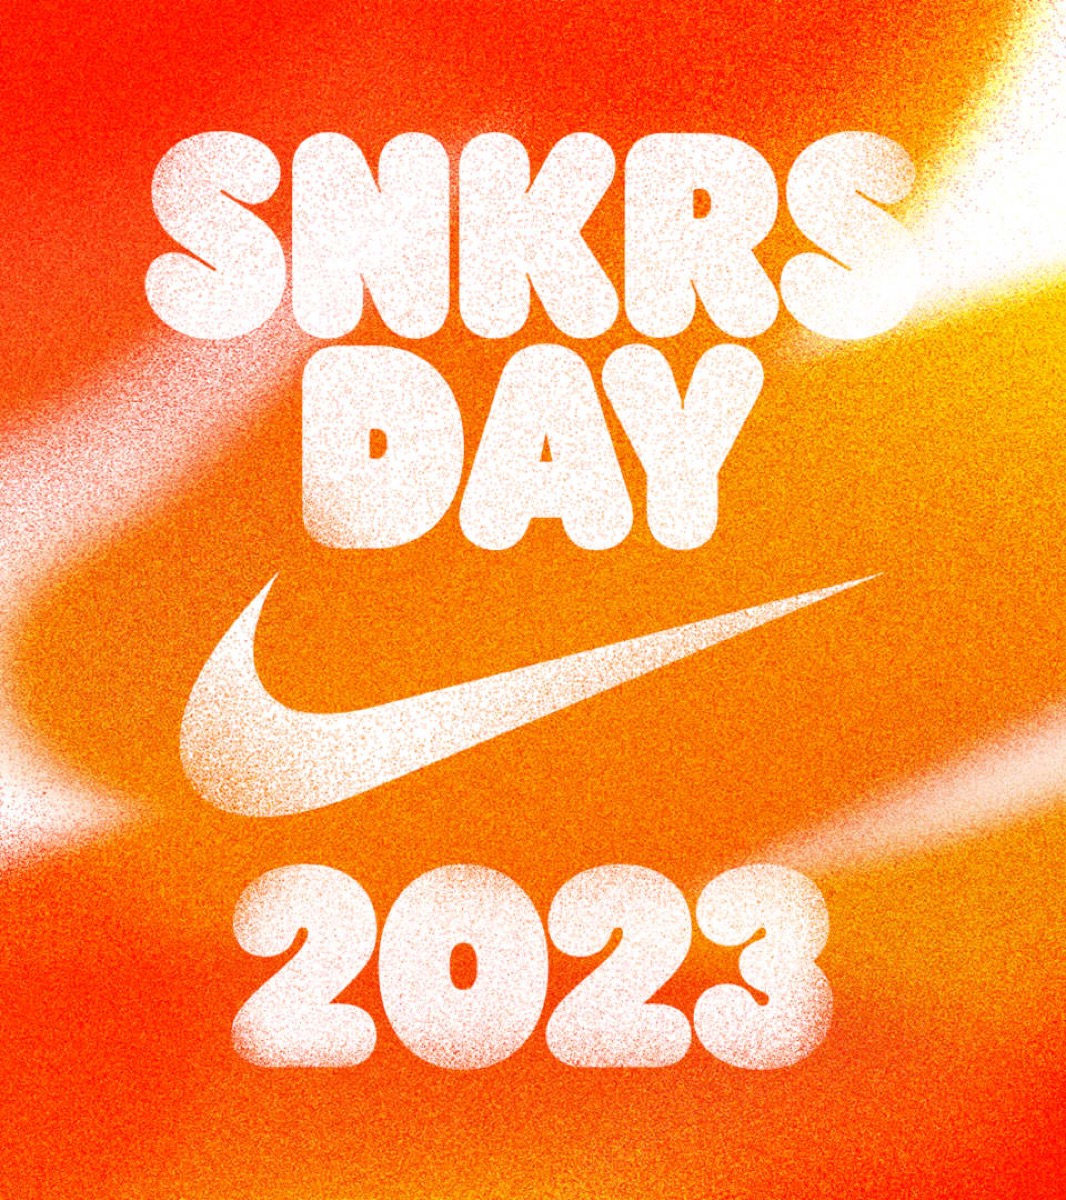 【Nike】SNKRS Day イベントが国内9月6日から9月9日に開催 UP TO DATE